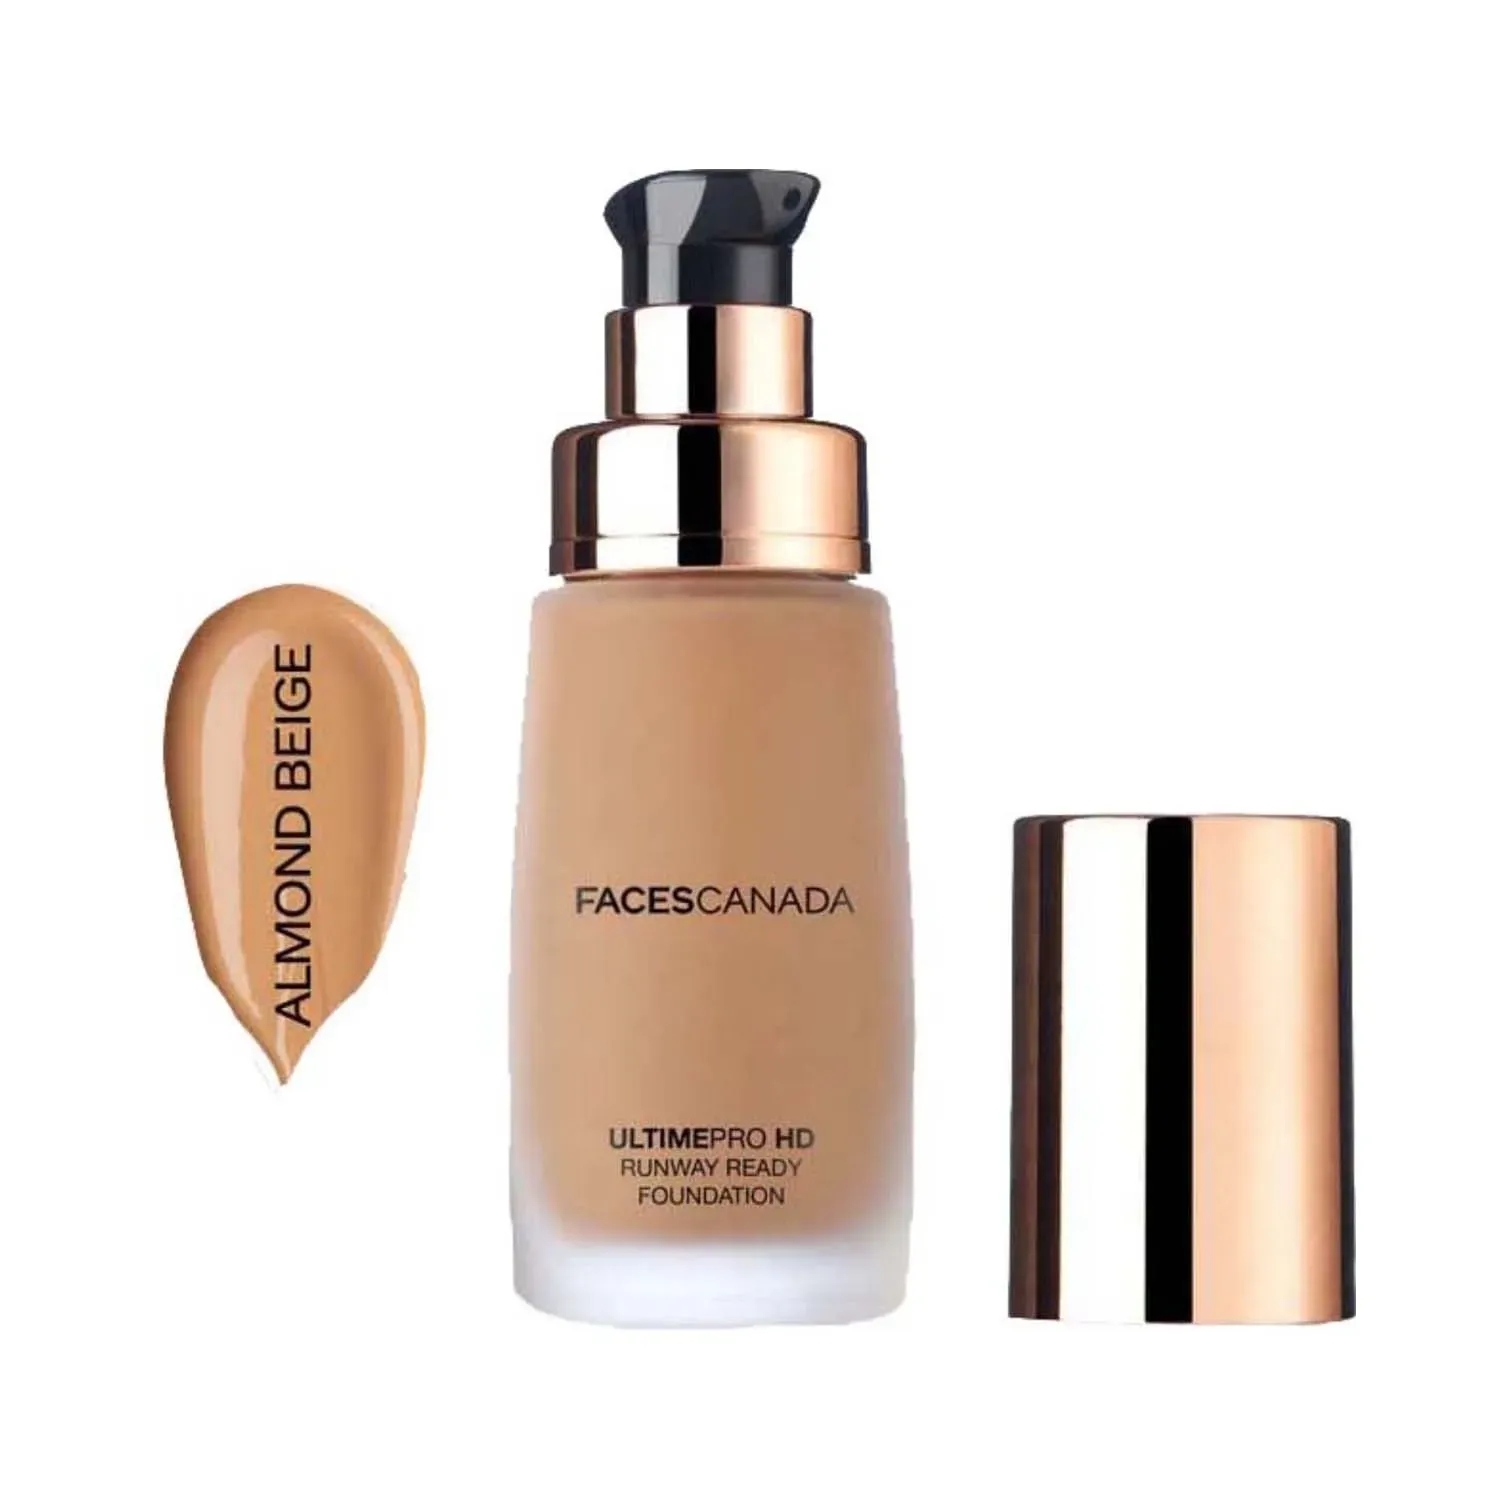 Faces Canada | Faces Canada Ultime Pro HD Runway Ready Foundation - 06 Beige (30ml)